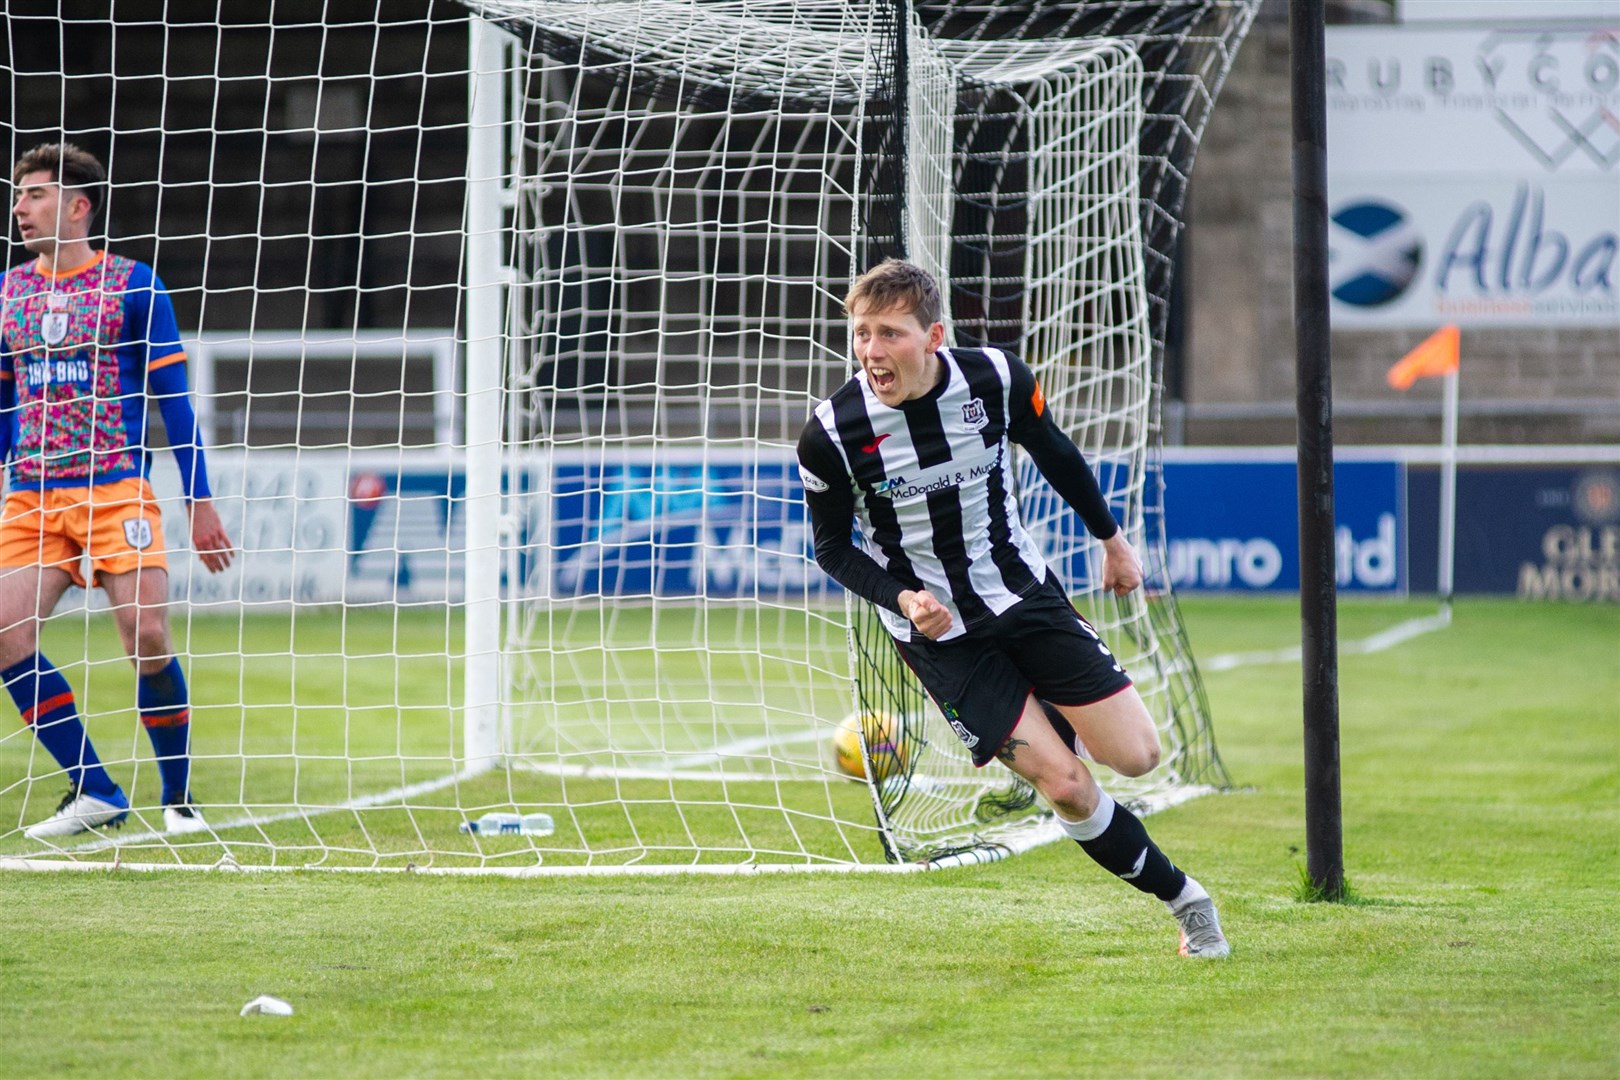 Kane Hester scored four times in the 5-1 win over Annan Athletic. Picture: Daniel Forsyth